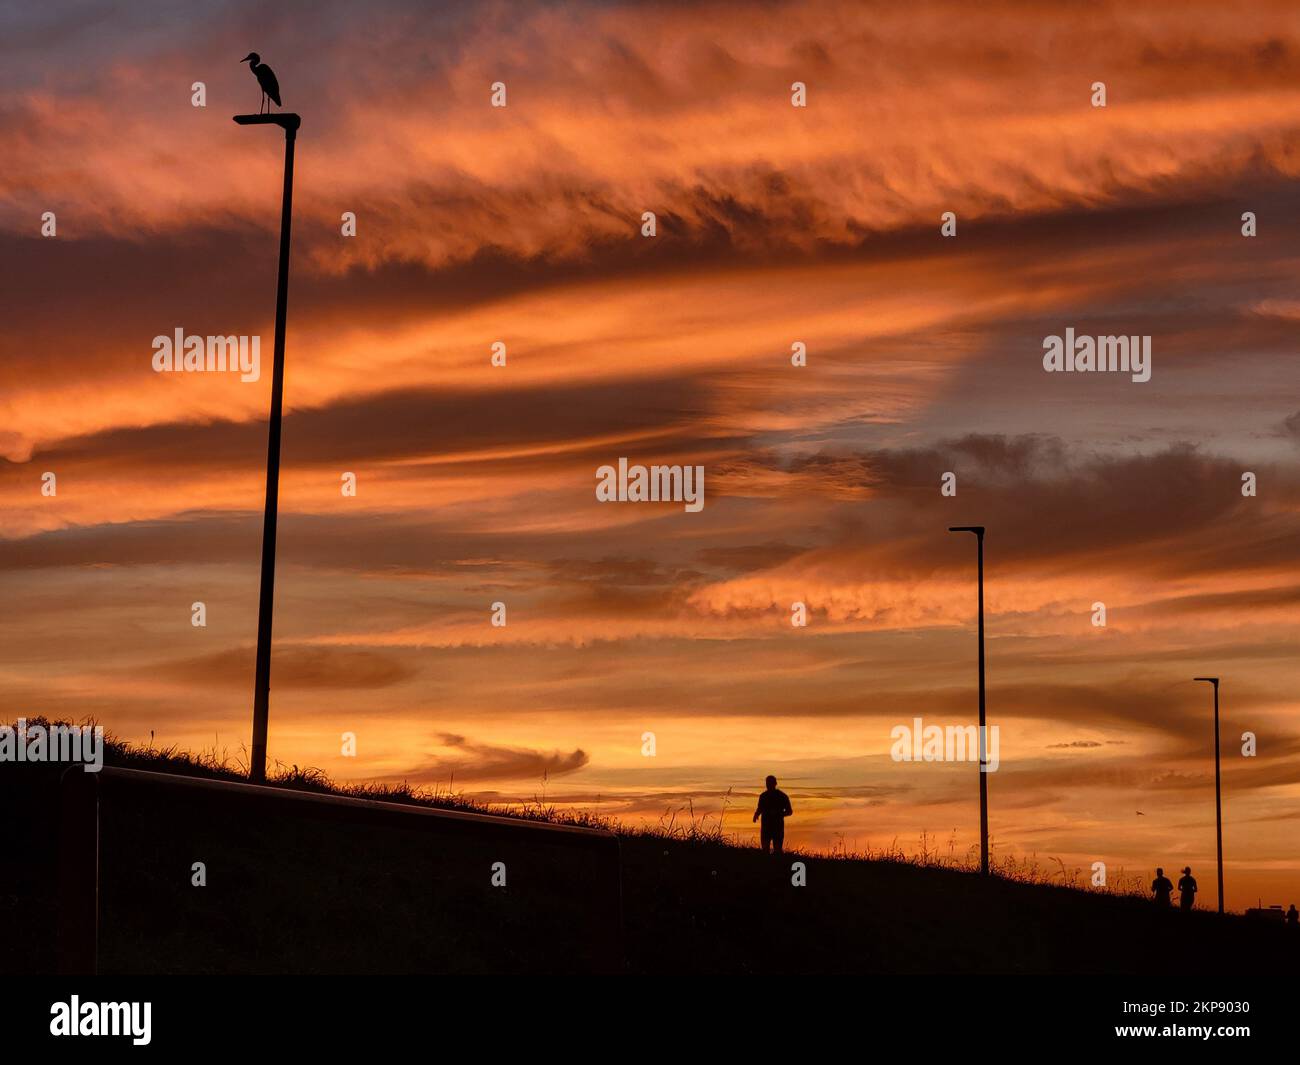 A silhouette of a person under a sunset sky Stock Photo